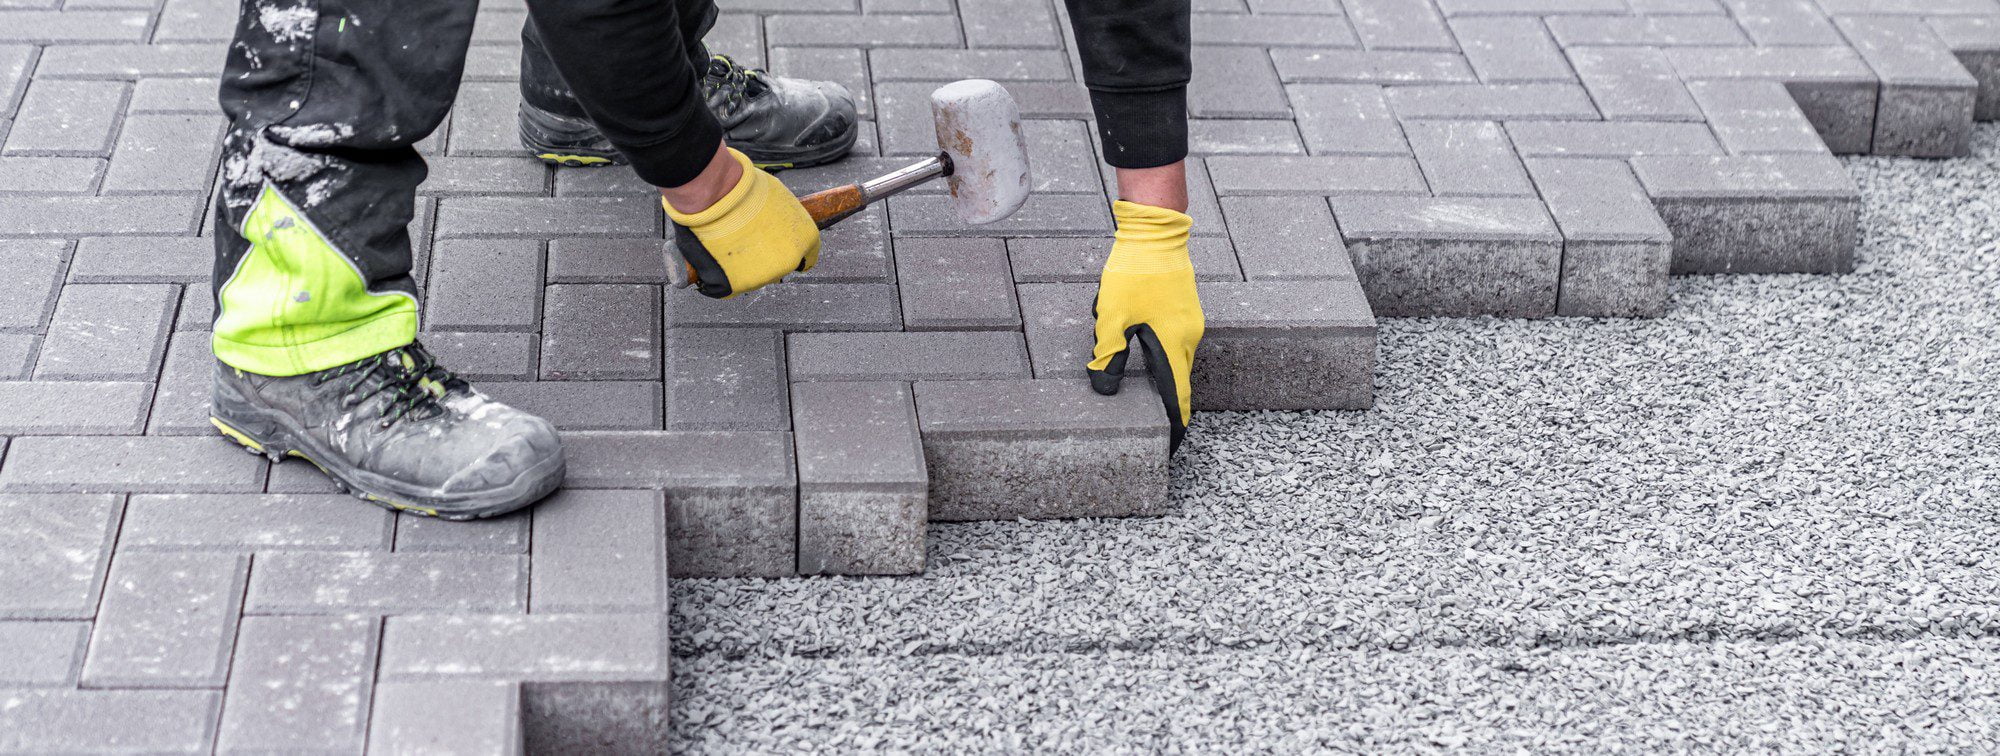 The image shows a close-up of a person laying paving stones or slabs, commonly seen in the construction of walkways, driveways, or patios. The person is wearing dirty work clothes and protective gear, such as a high-visibility boot on one foot and what appears to be a safety boot on the other, while their hands are covered with yellow work gloves. They are using a rubber mallet to properly set the paving stones into place. Under the stones is a base of crushed stone or gravel, which is used to ensure a stable and level foundation for the paving. The work is precise and requires skill to ensure that the pavement will be even and durable. The image captures a moment of manual labour in the construction or landscaping industry.